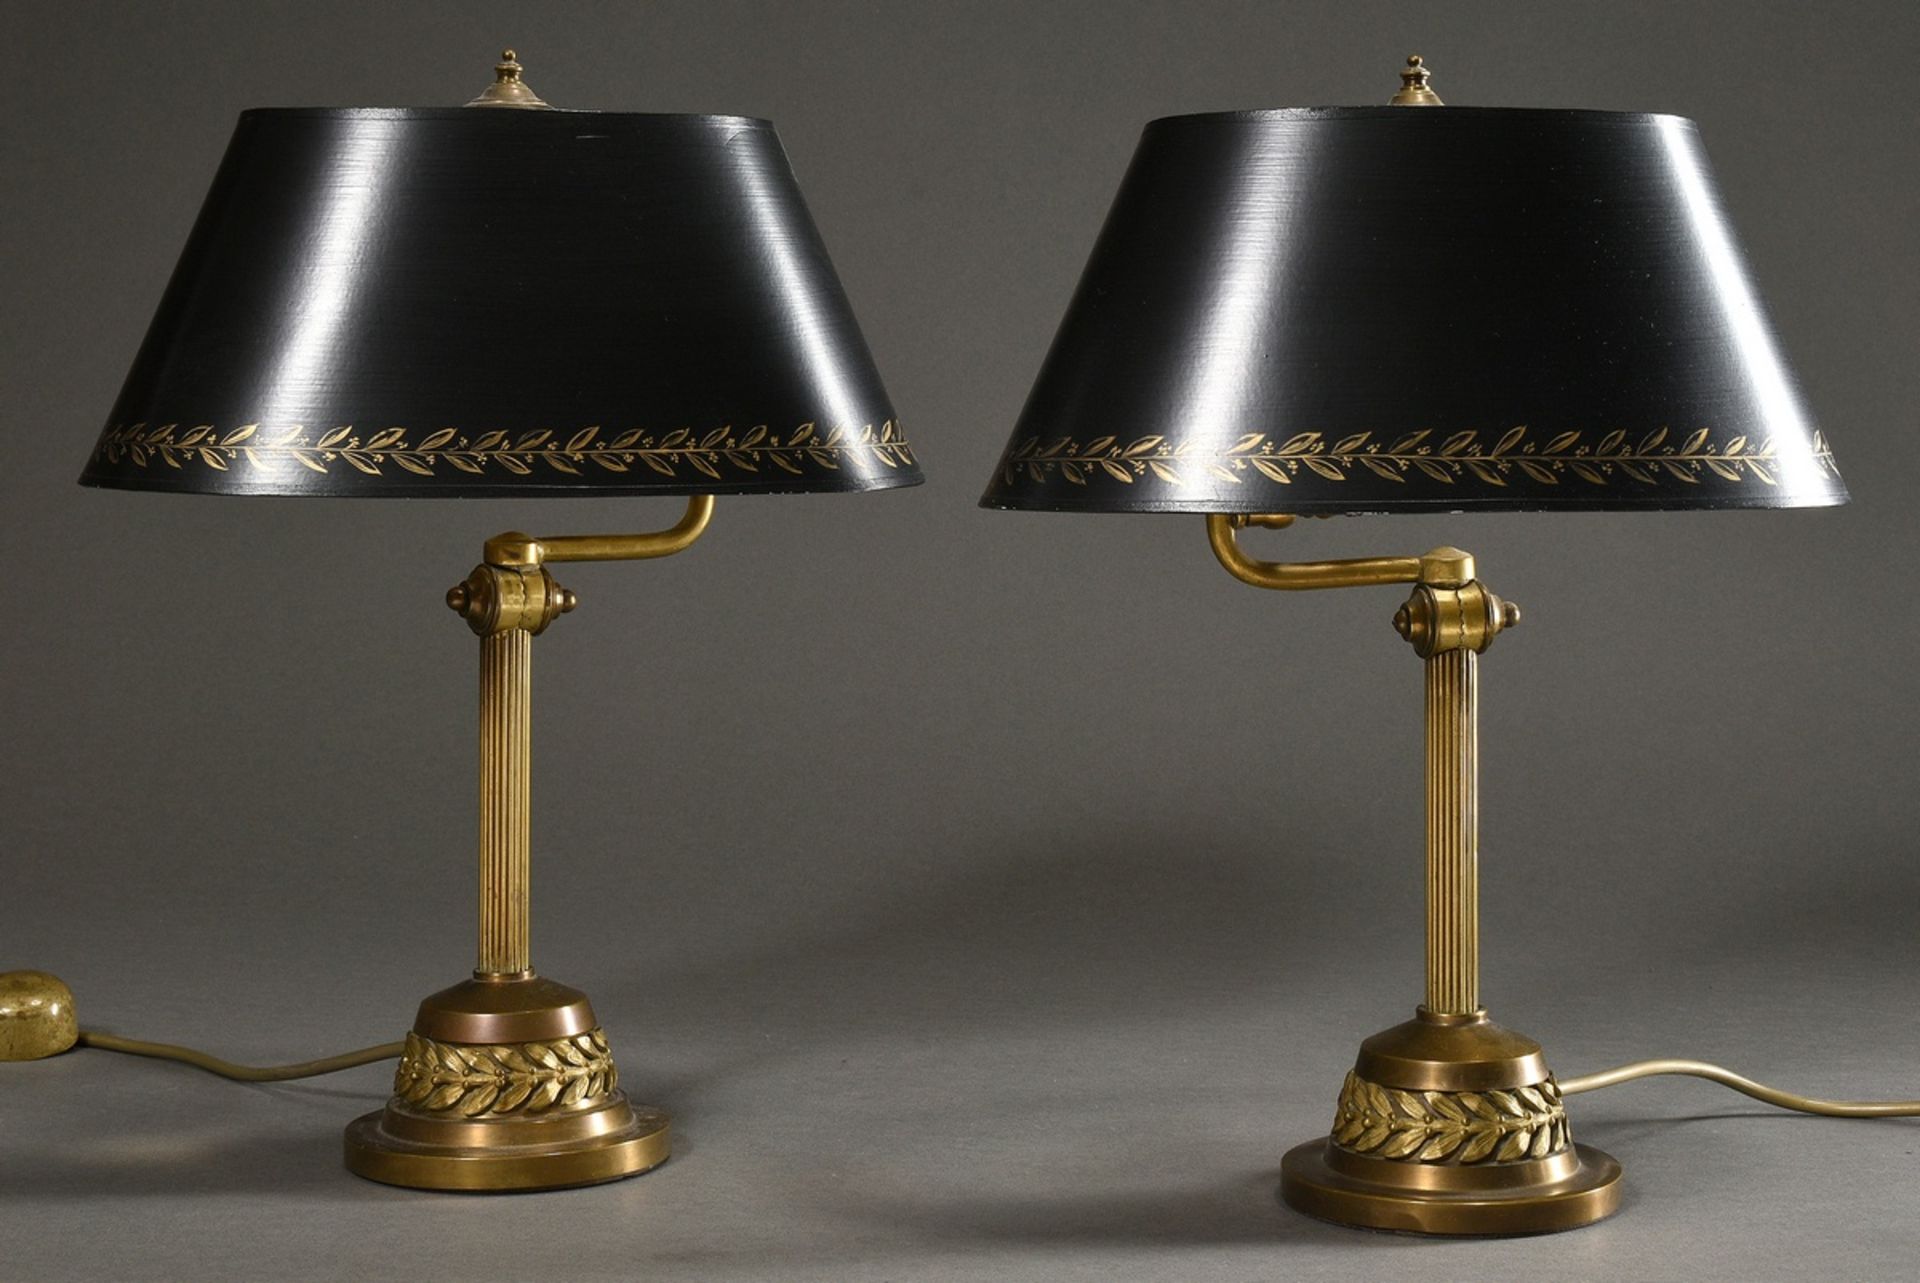 Pair of bronze column lamps with laurel rim on base and on the adjustable black shades (handmade), 